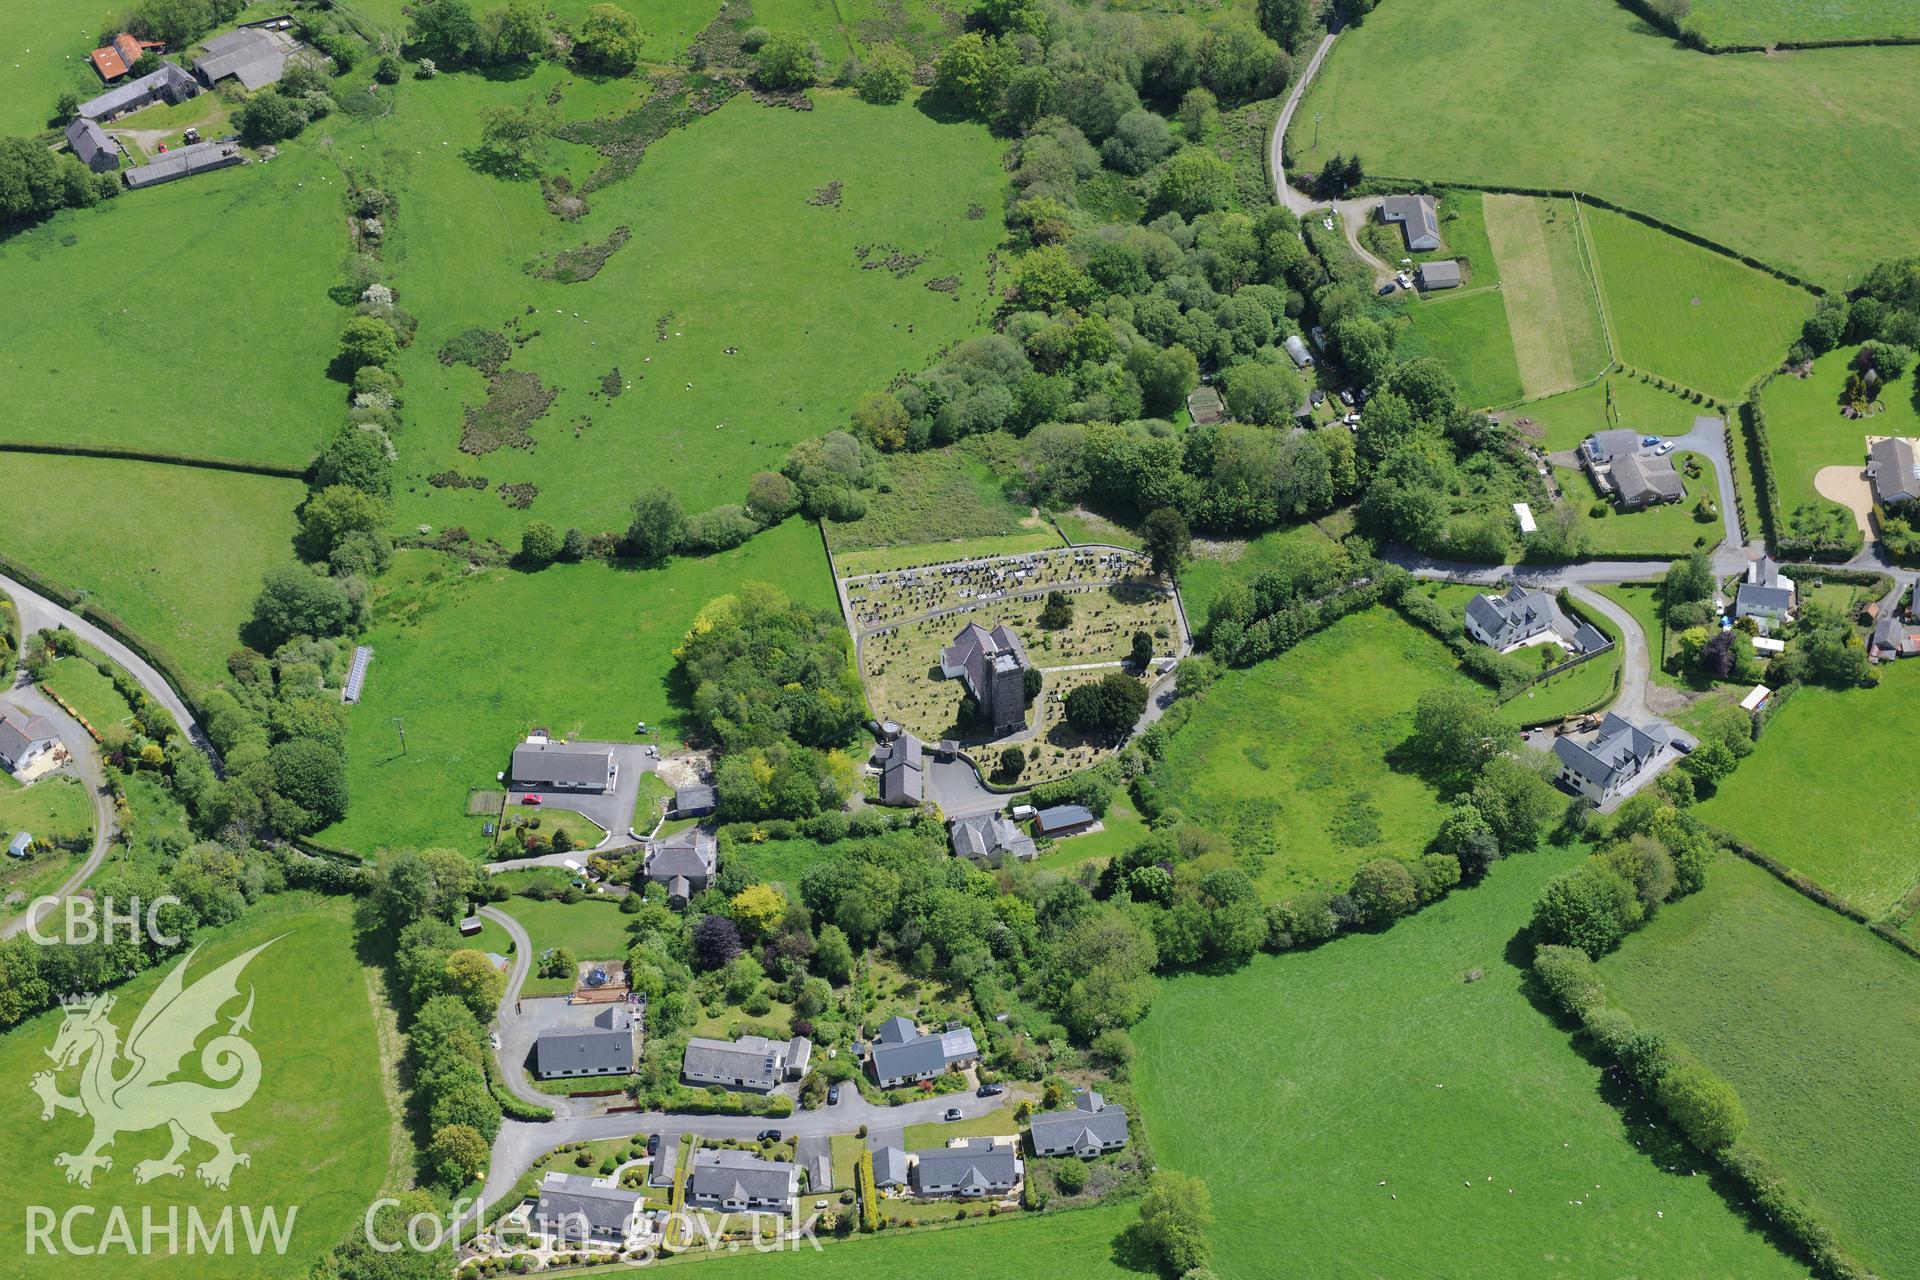 St. Gwenog's Church, Llanwenog. Oblique aerial photograph taken during the Royal Commission's programme of archaeological aerial reconnaissance by Toby Driver on 3rd June 2015.